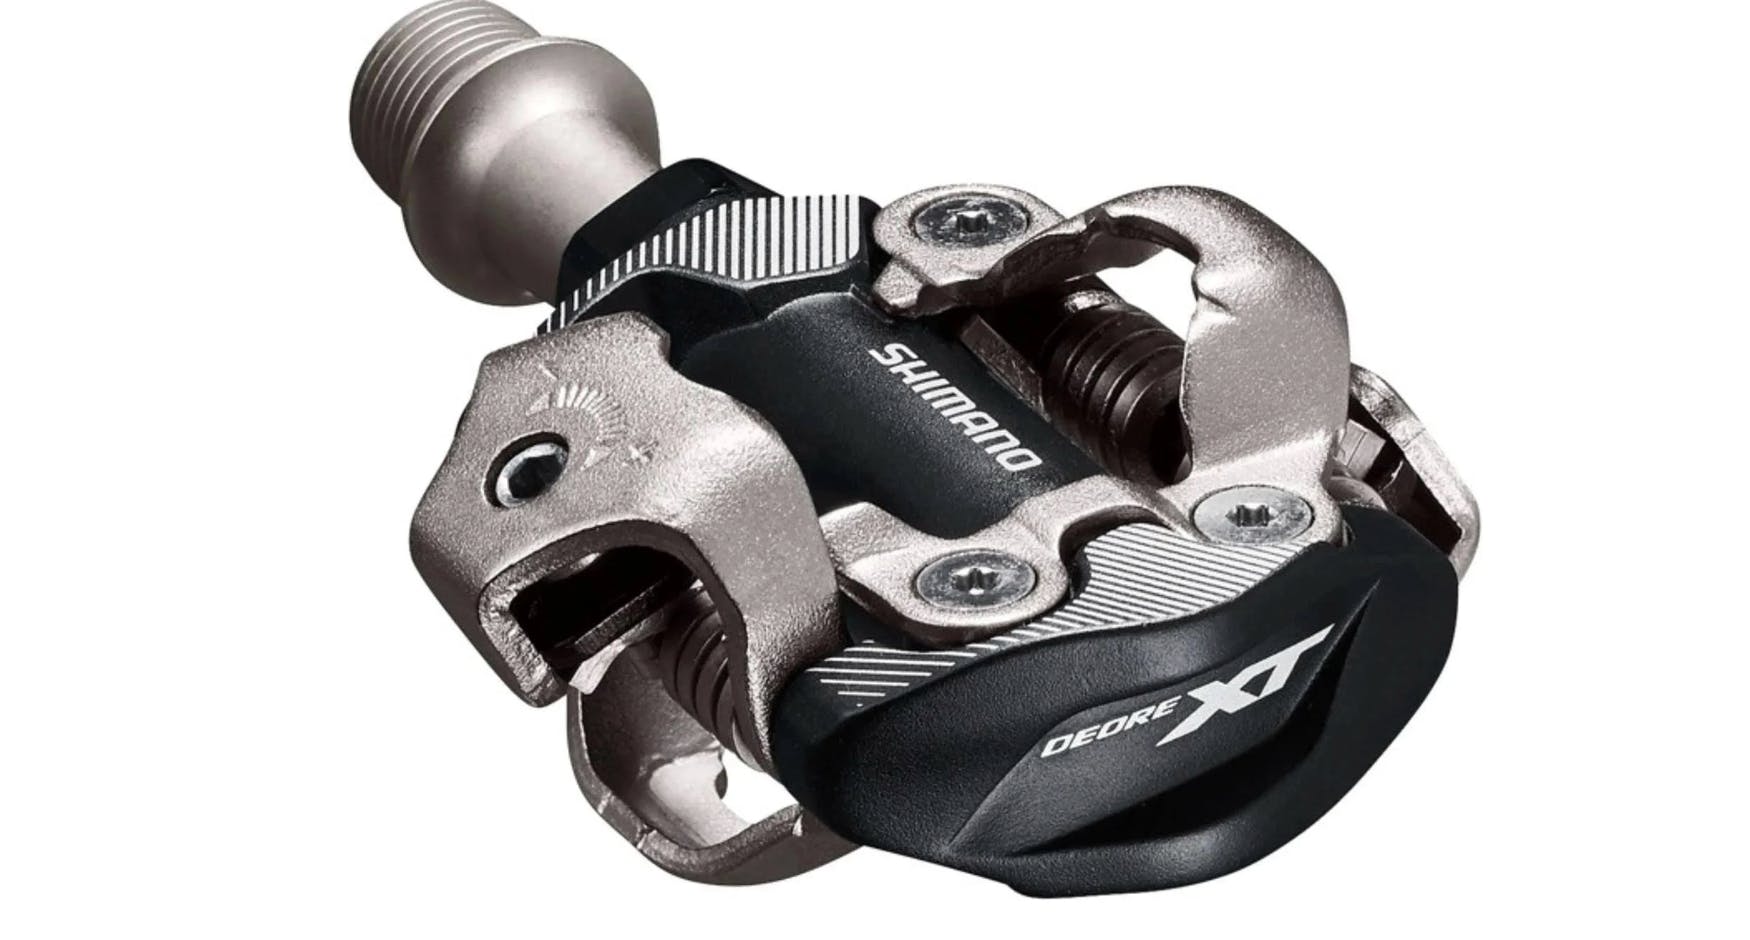 The Shimano Deore XT PD-M8100 SPD.